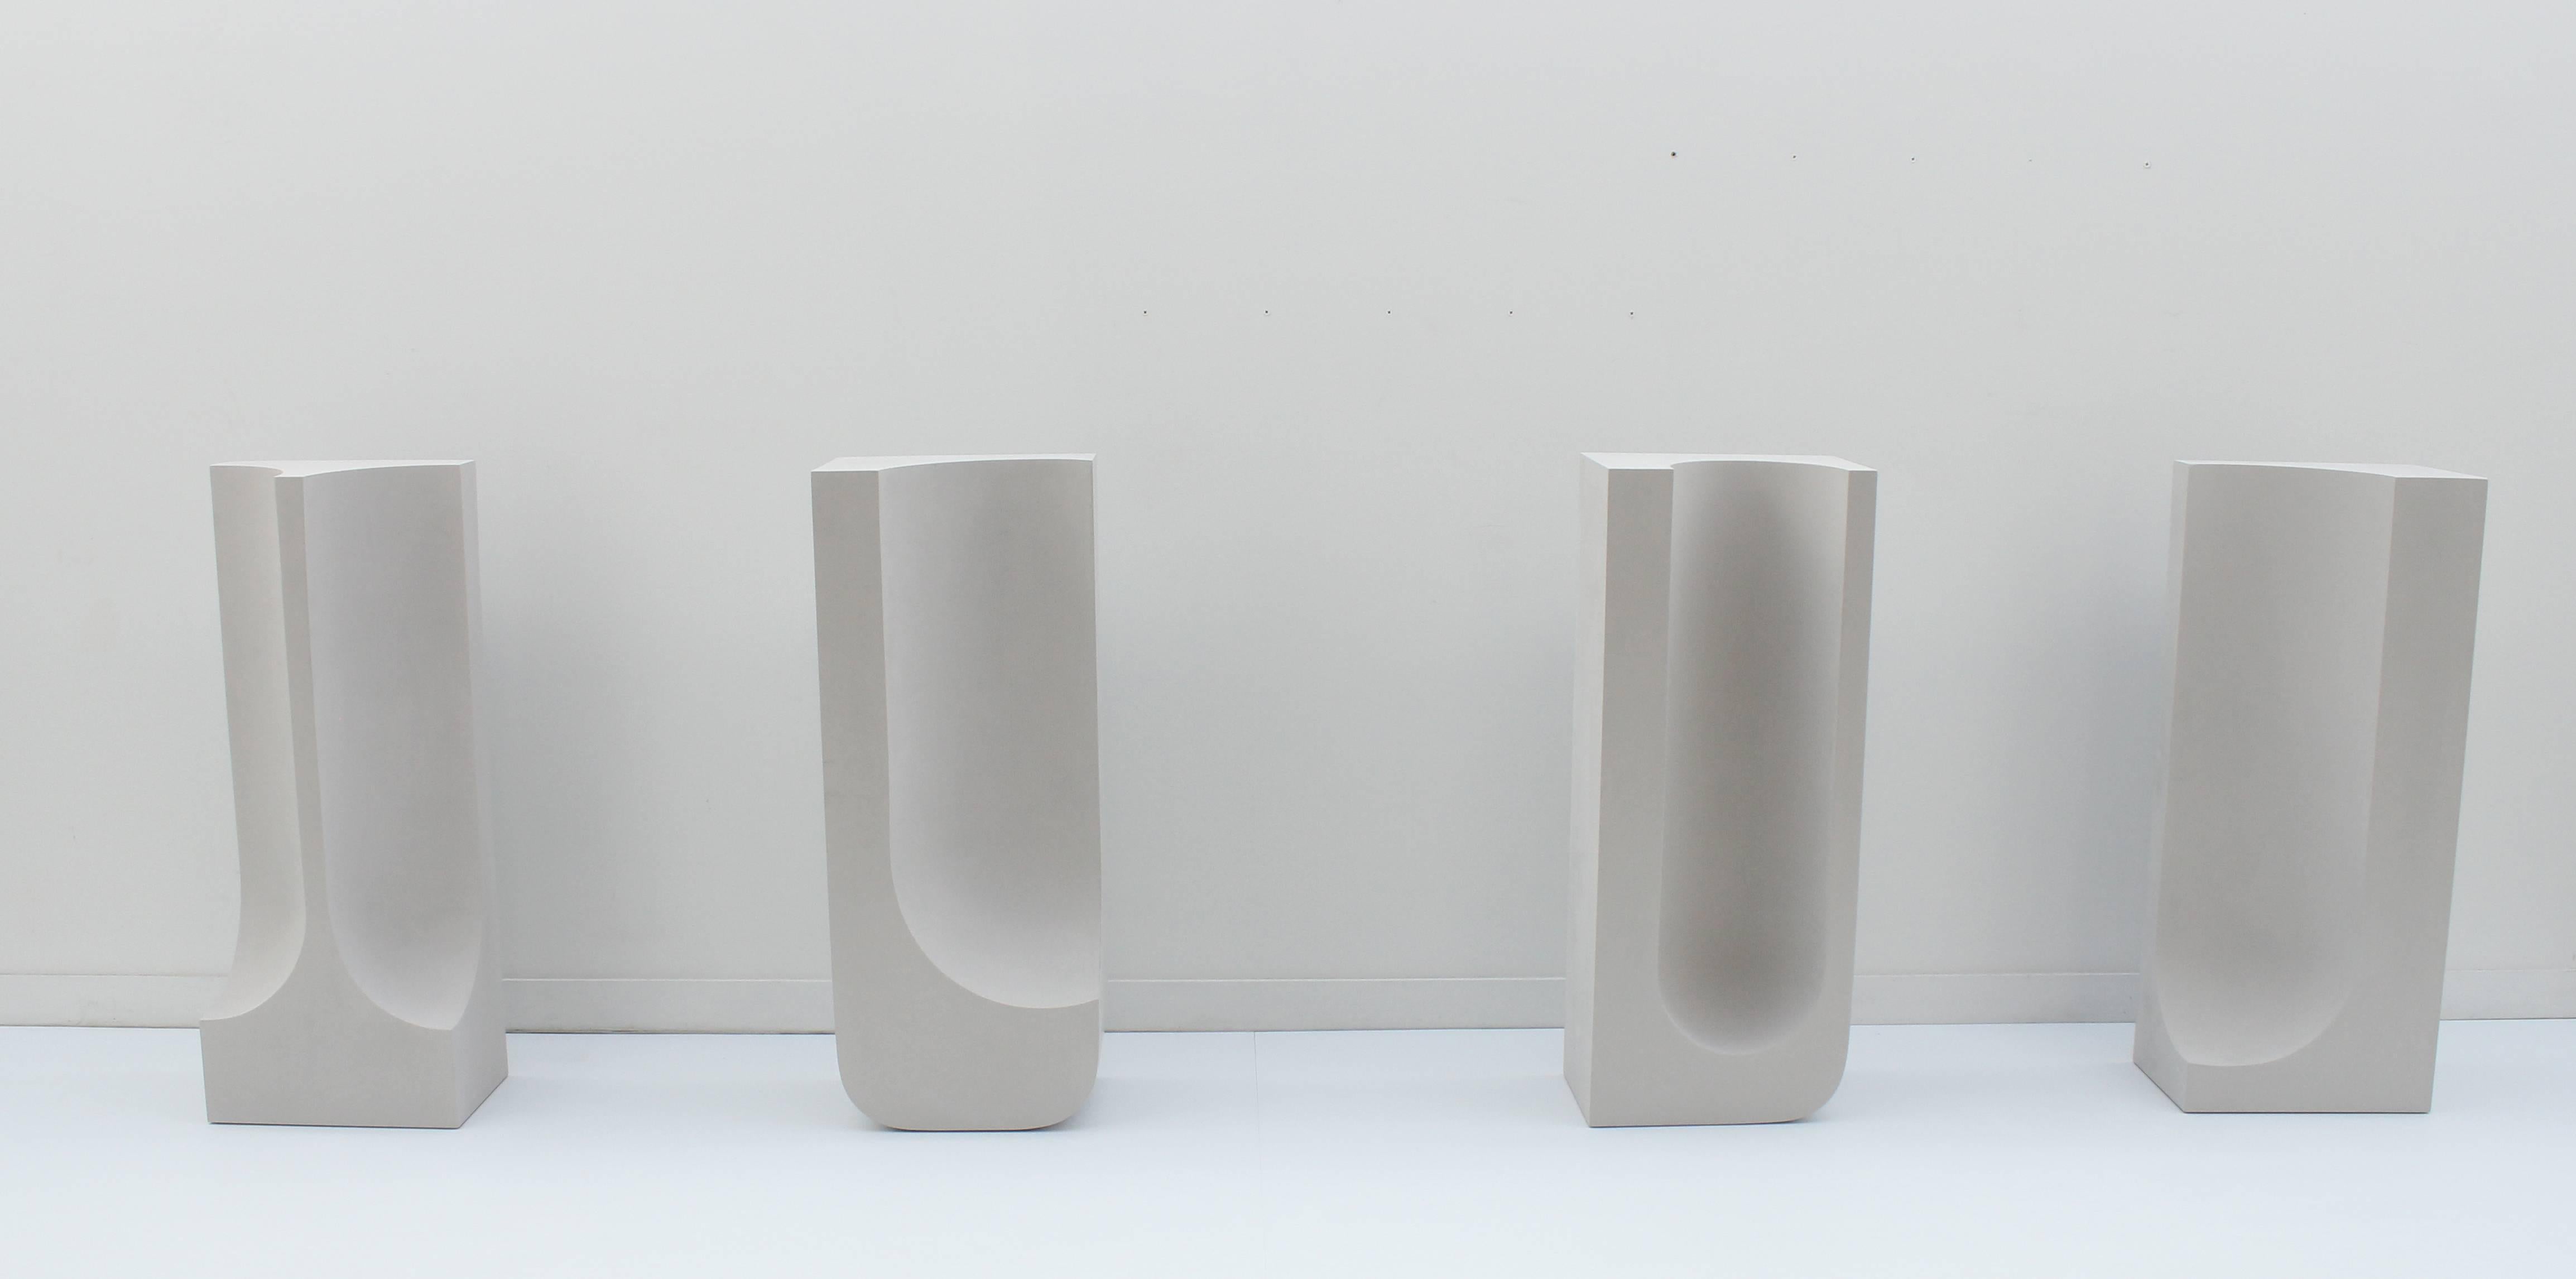 Exploration of Minimalist shapes quietly referencing Brutalist architecture. Cast by hand using unpigmented plaster, shapes can be grouped together or purchased as one striking, bold statement.